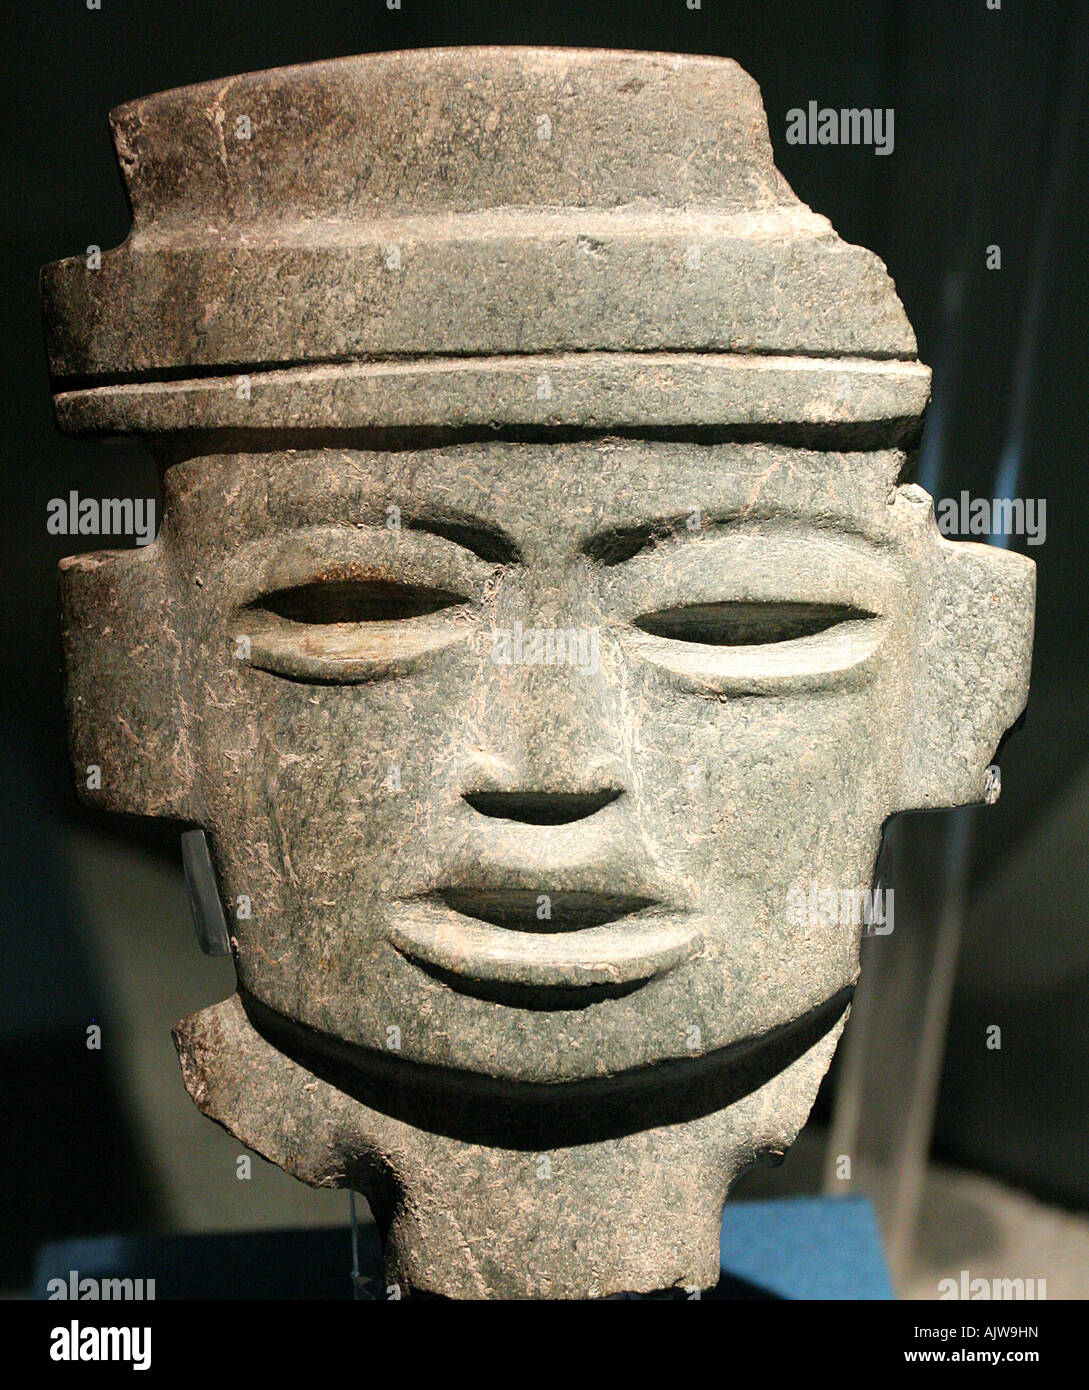 Stone sculpture of a chieftan's head excavated at Teotihuacan, the precolumbian archeological site near Mexico City. Stock Photo